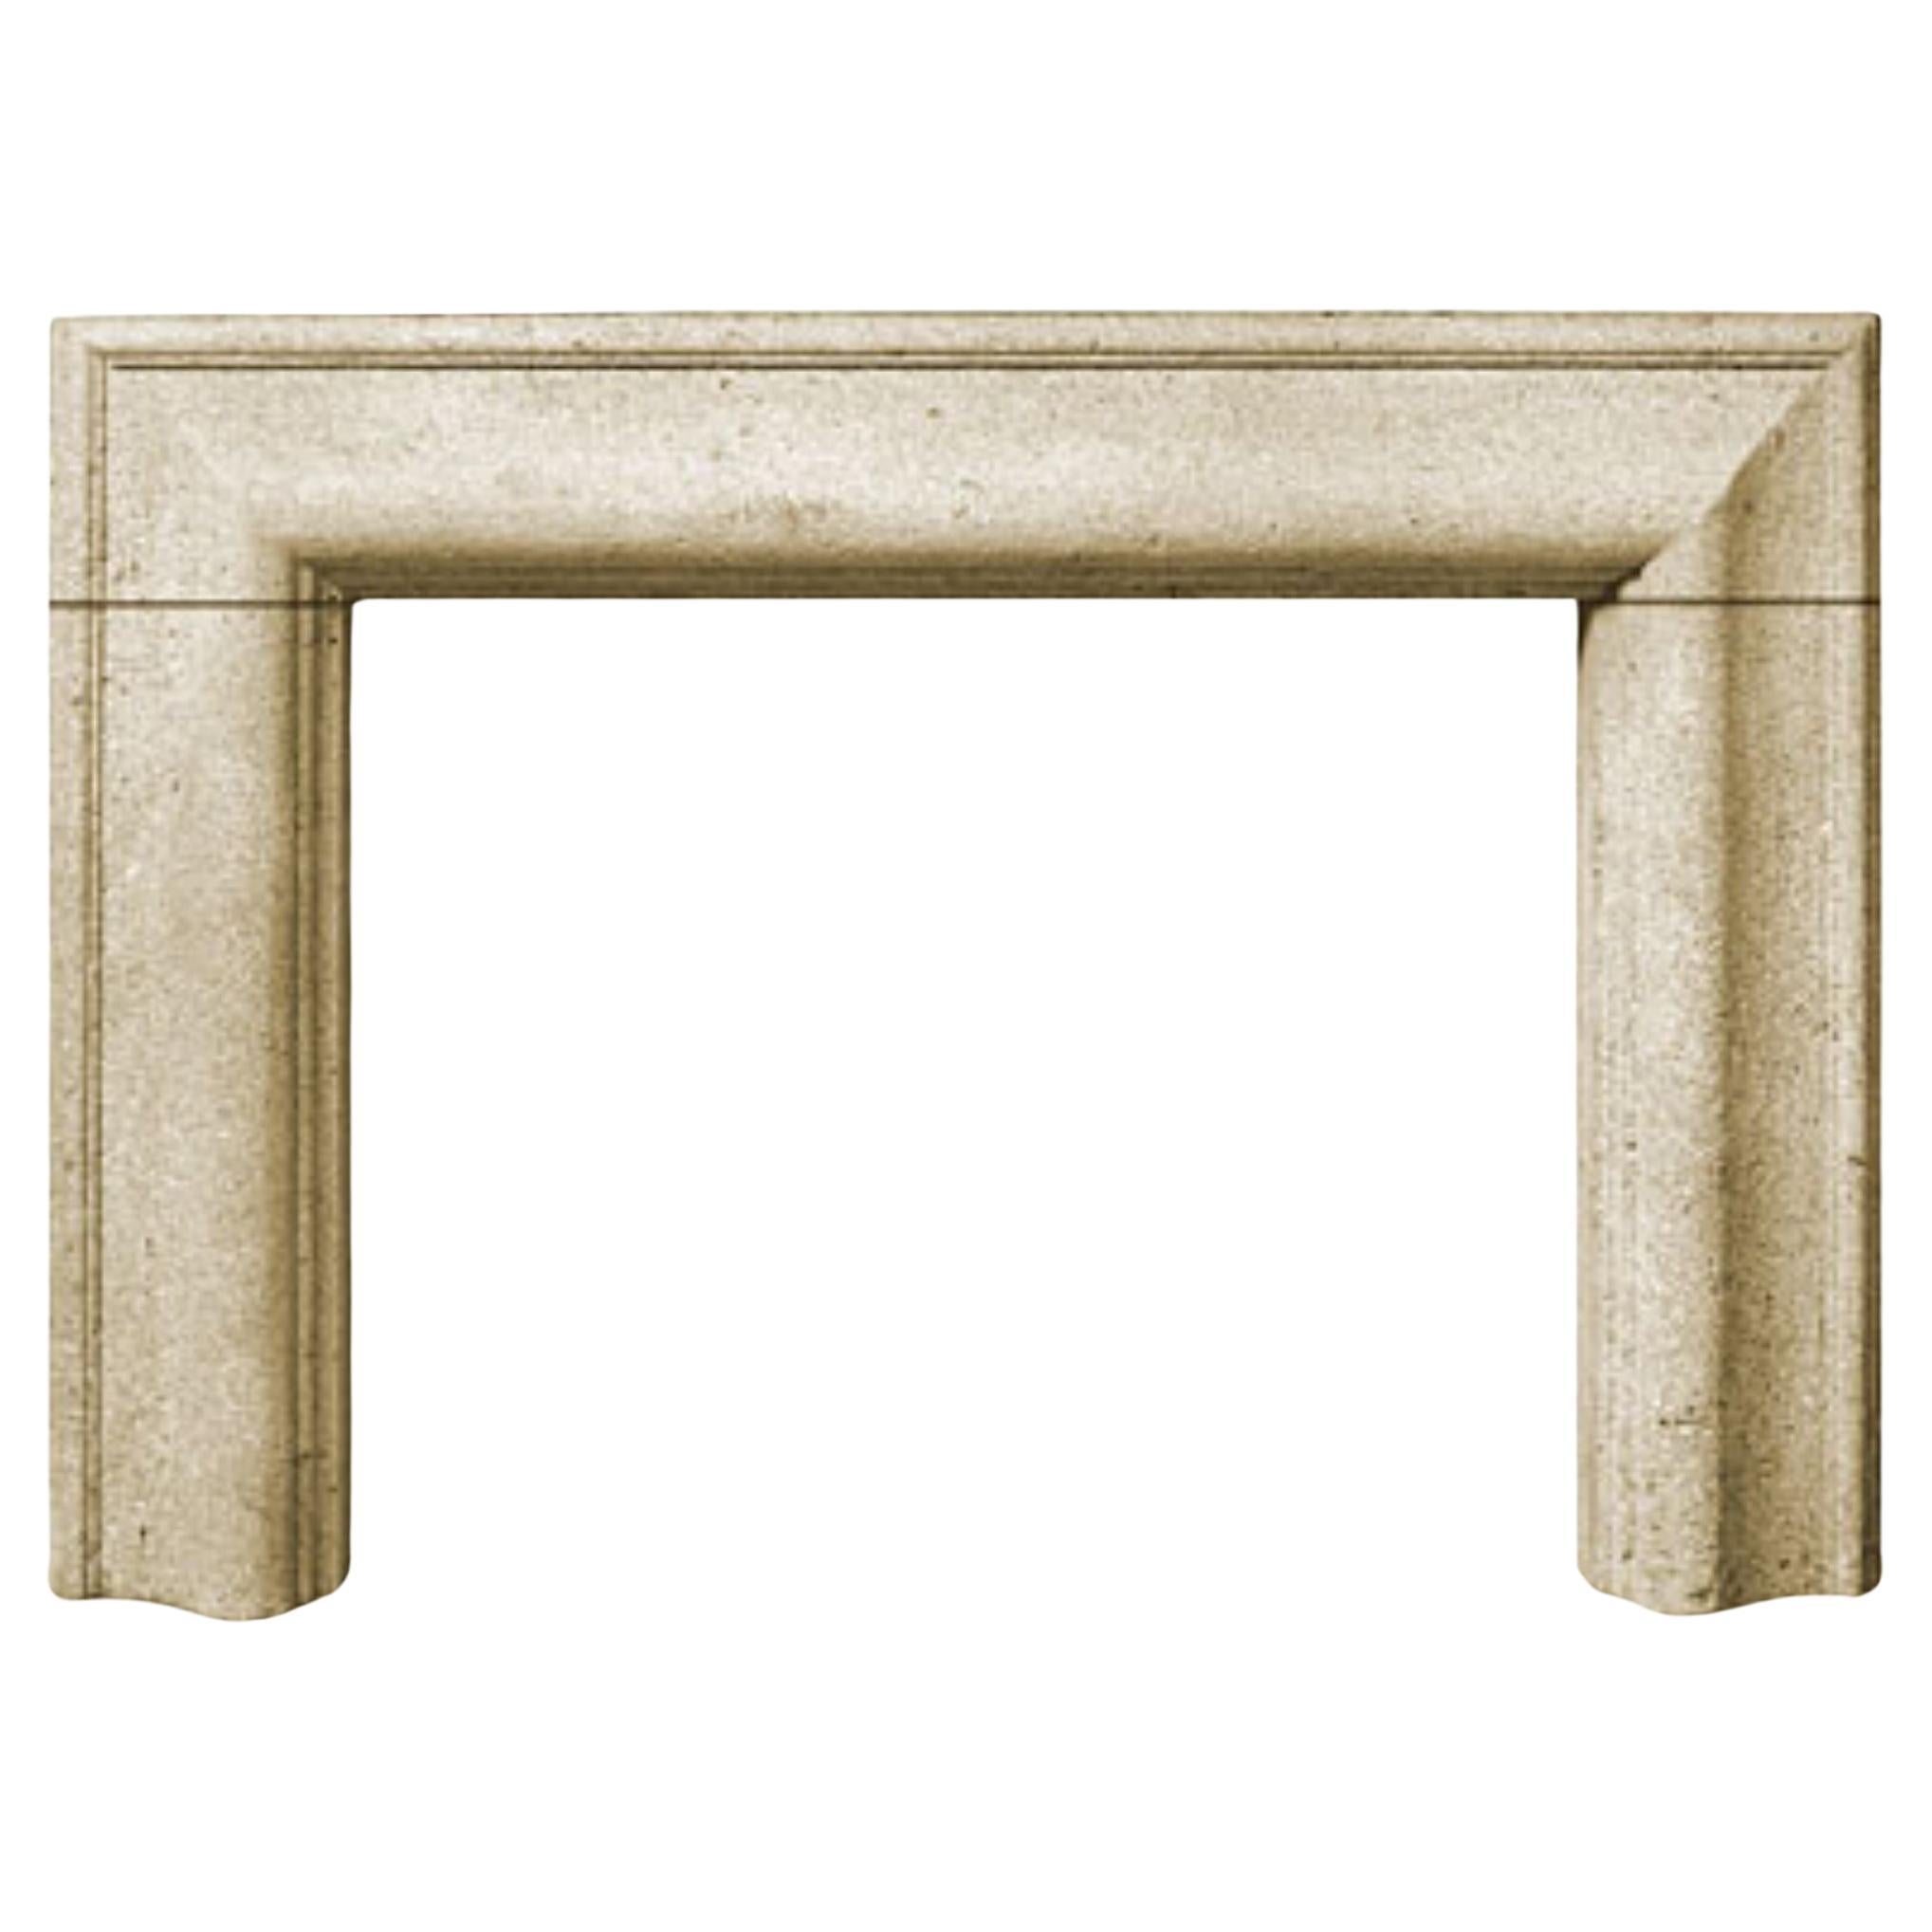 The Bolection A: A Classical Stone Fireplace Profile Without Shelf or Plinths